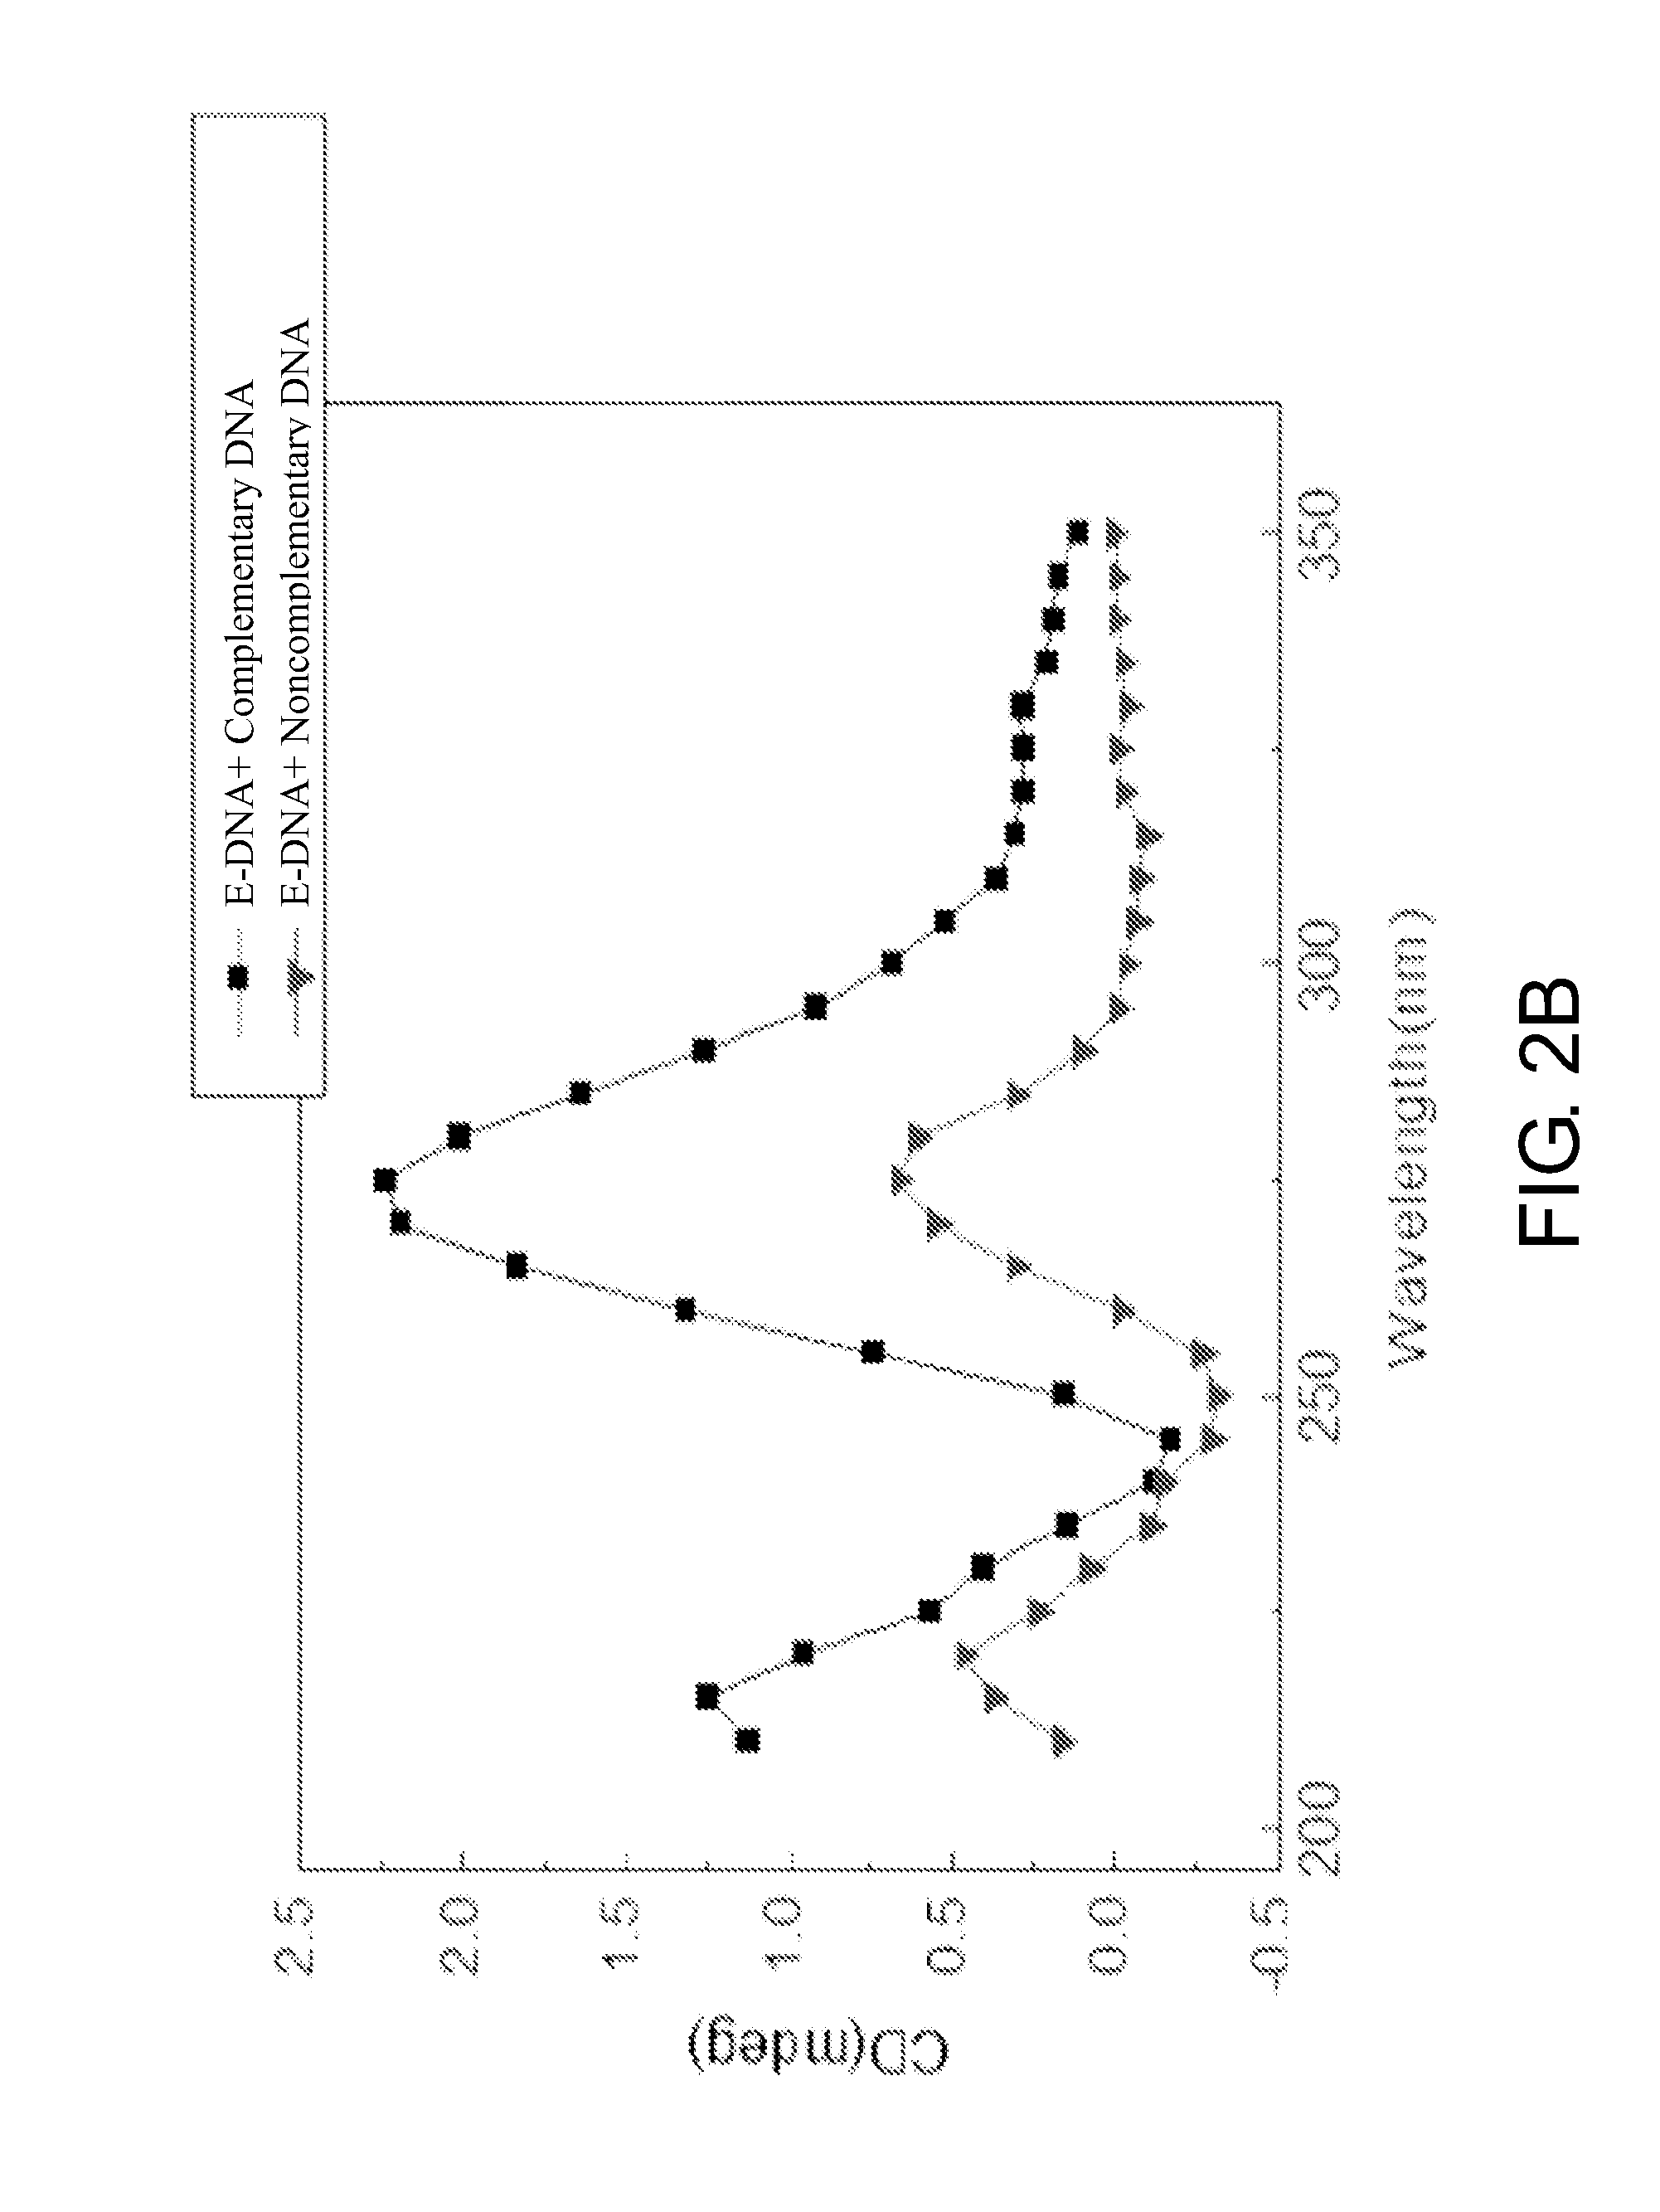 Method of using neutrilized DNA (n-DNA) as surface probe for high throughput detection platform